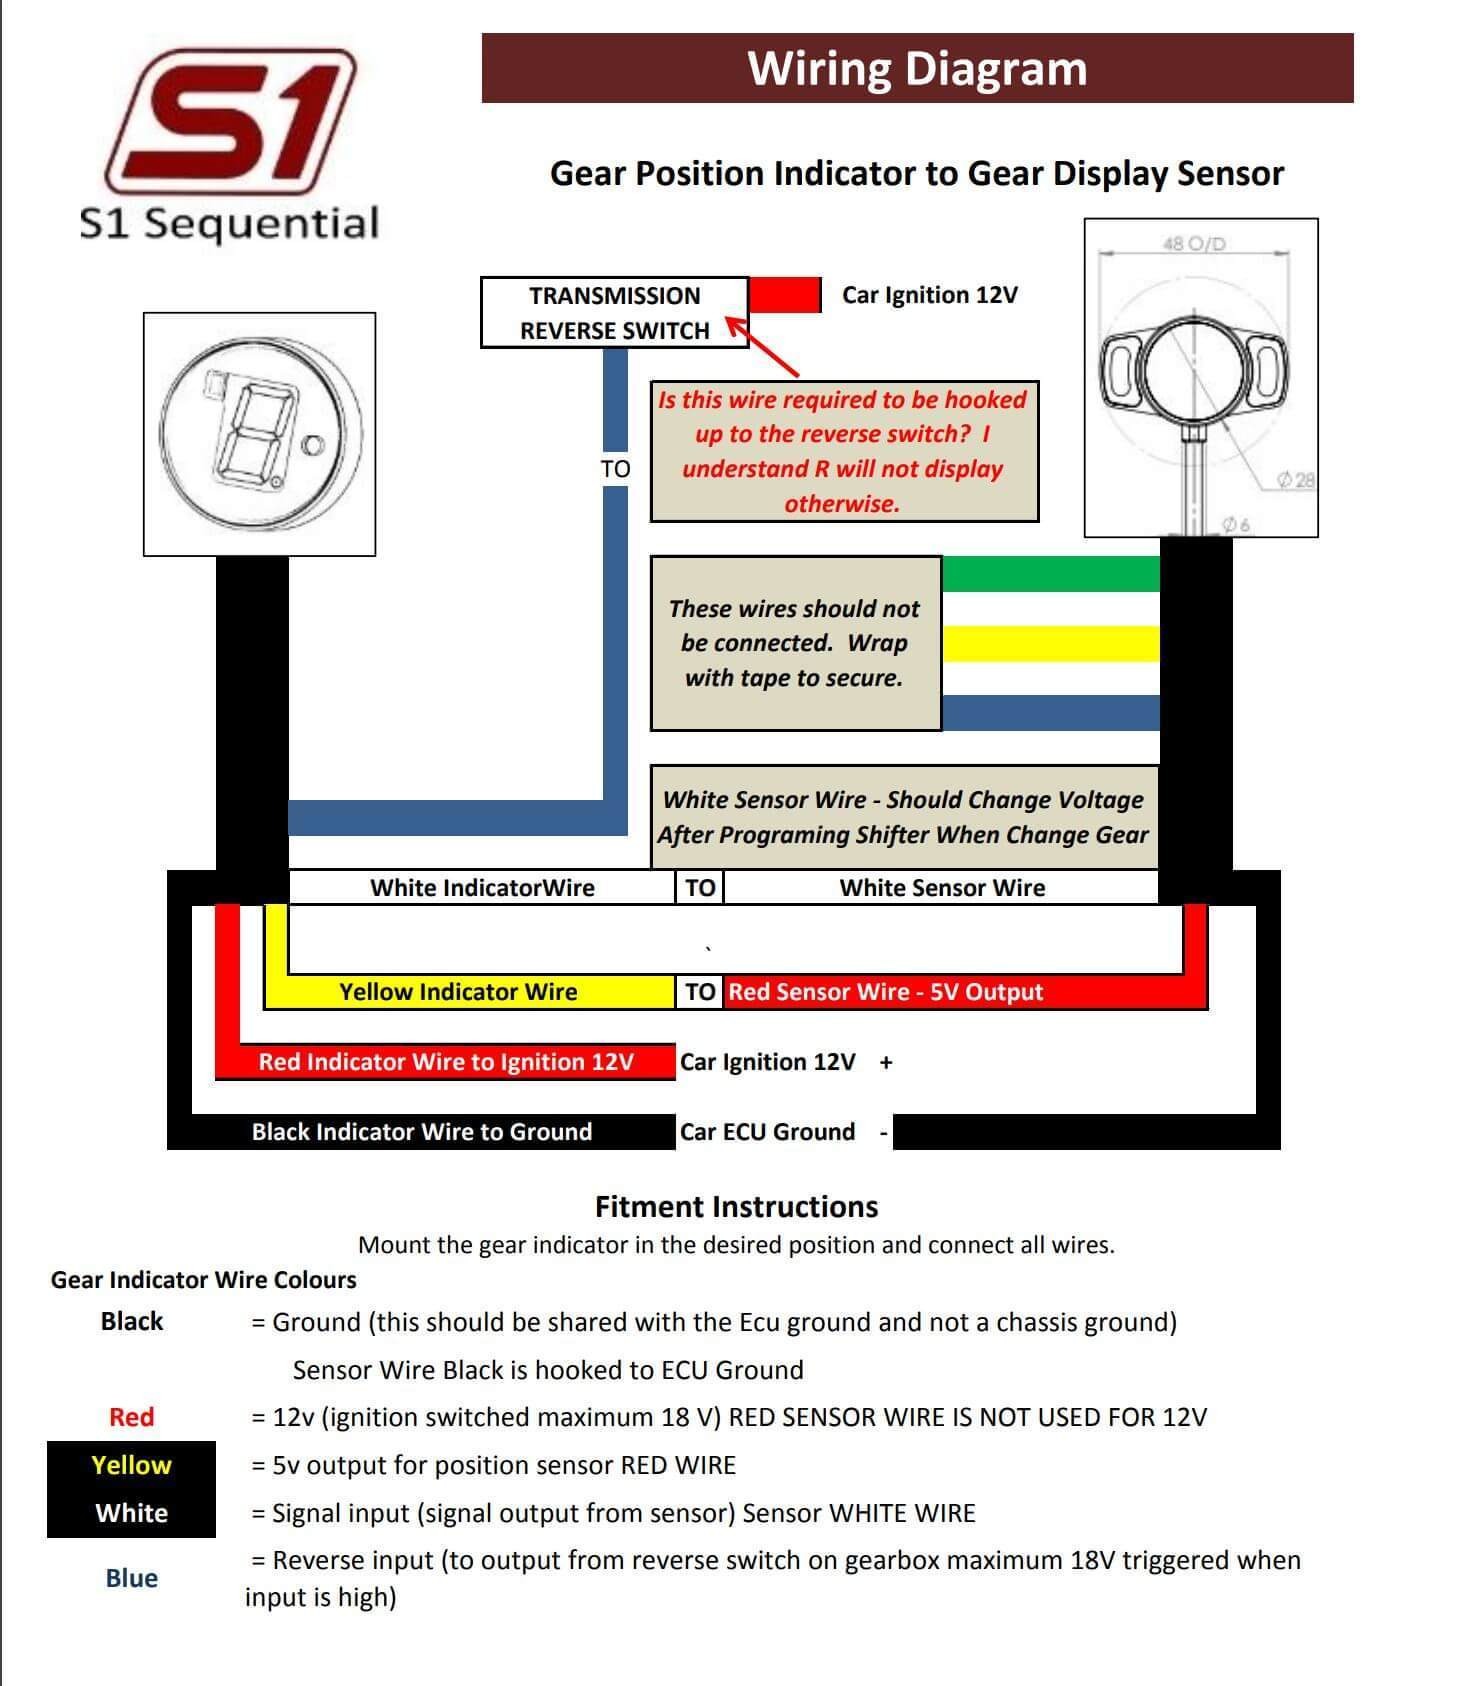 S1 Switch Wiring Diagram Gear Indicator Instructions S1 Sequential